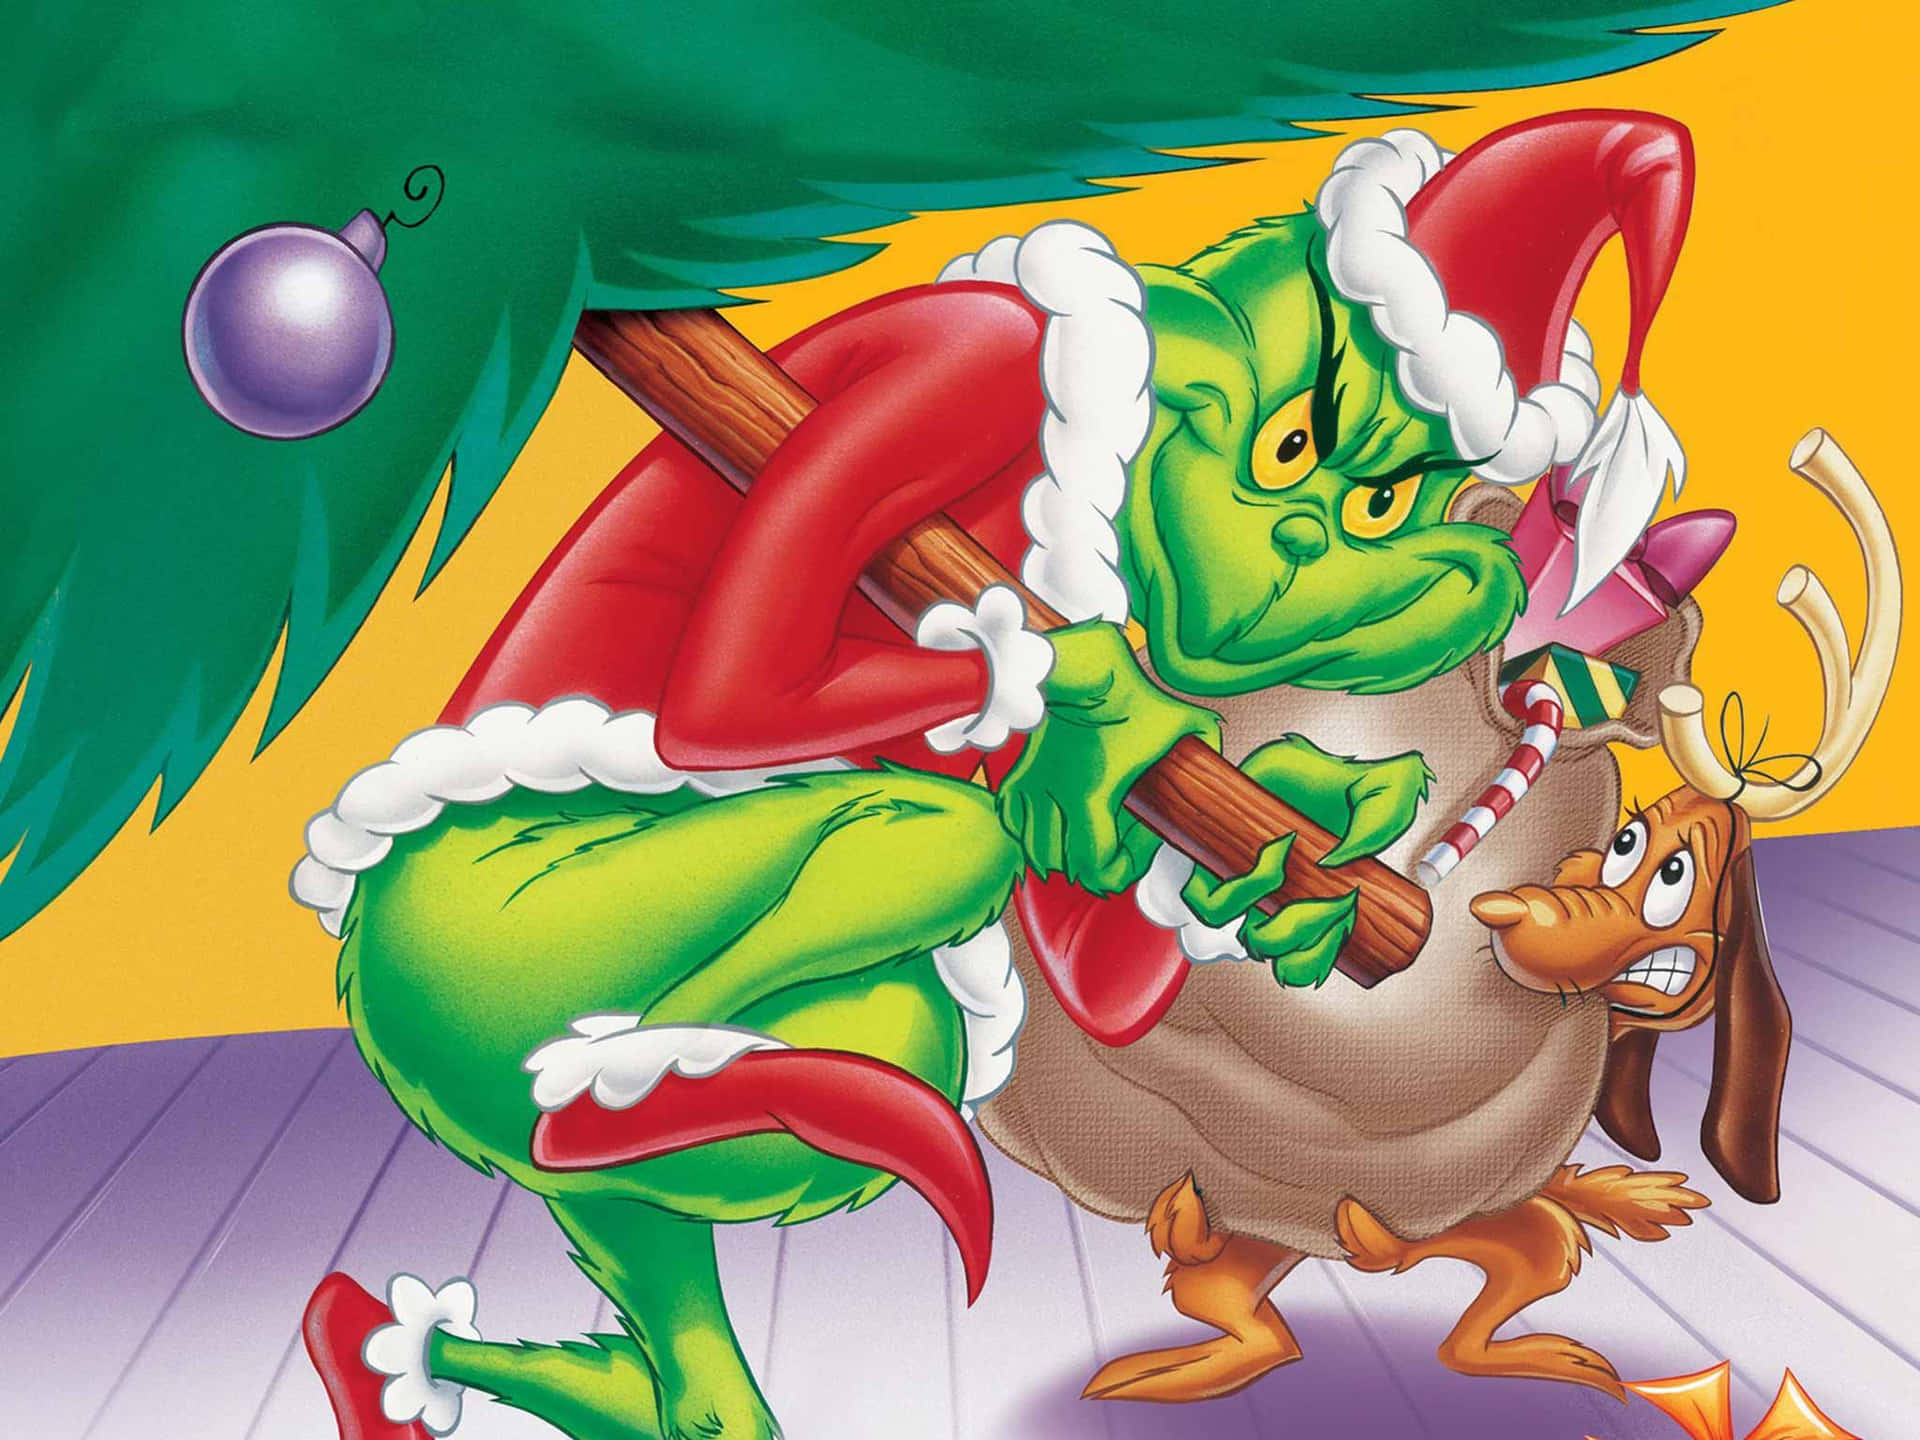 The Grinch is out to ruin Christmas